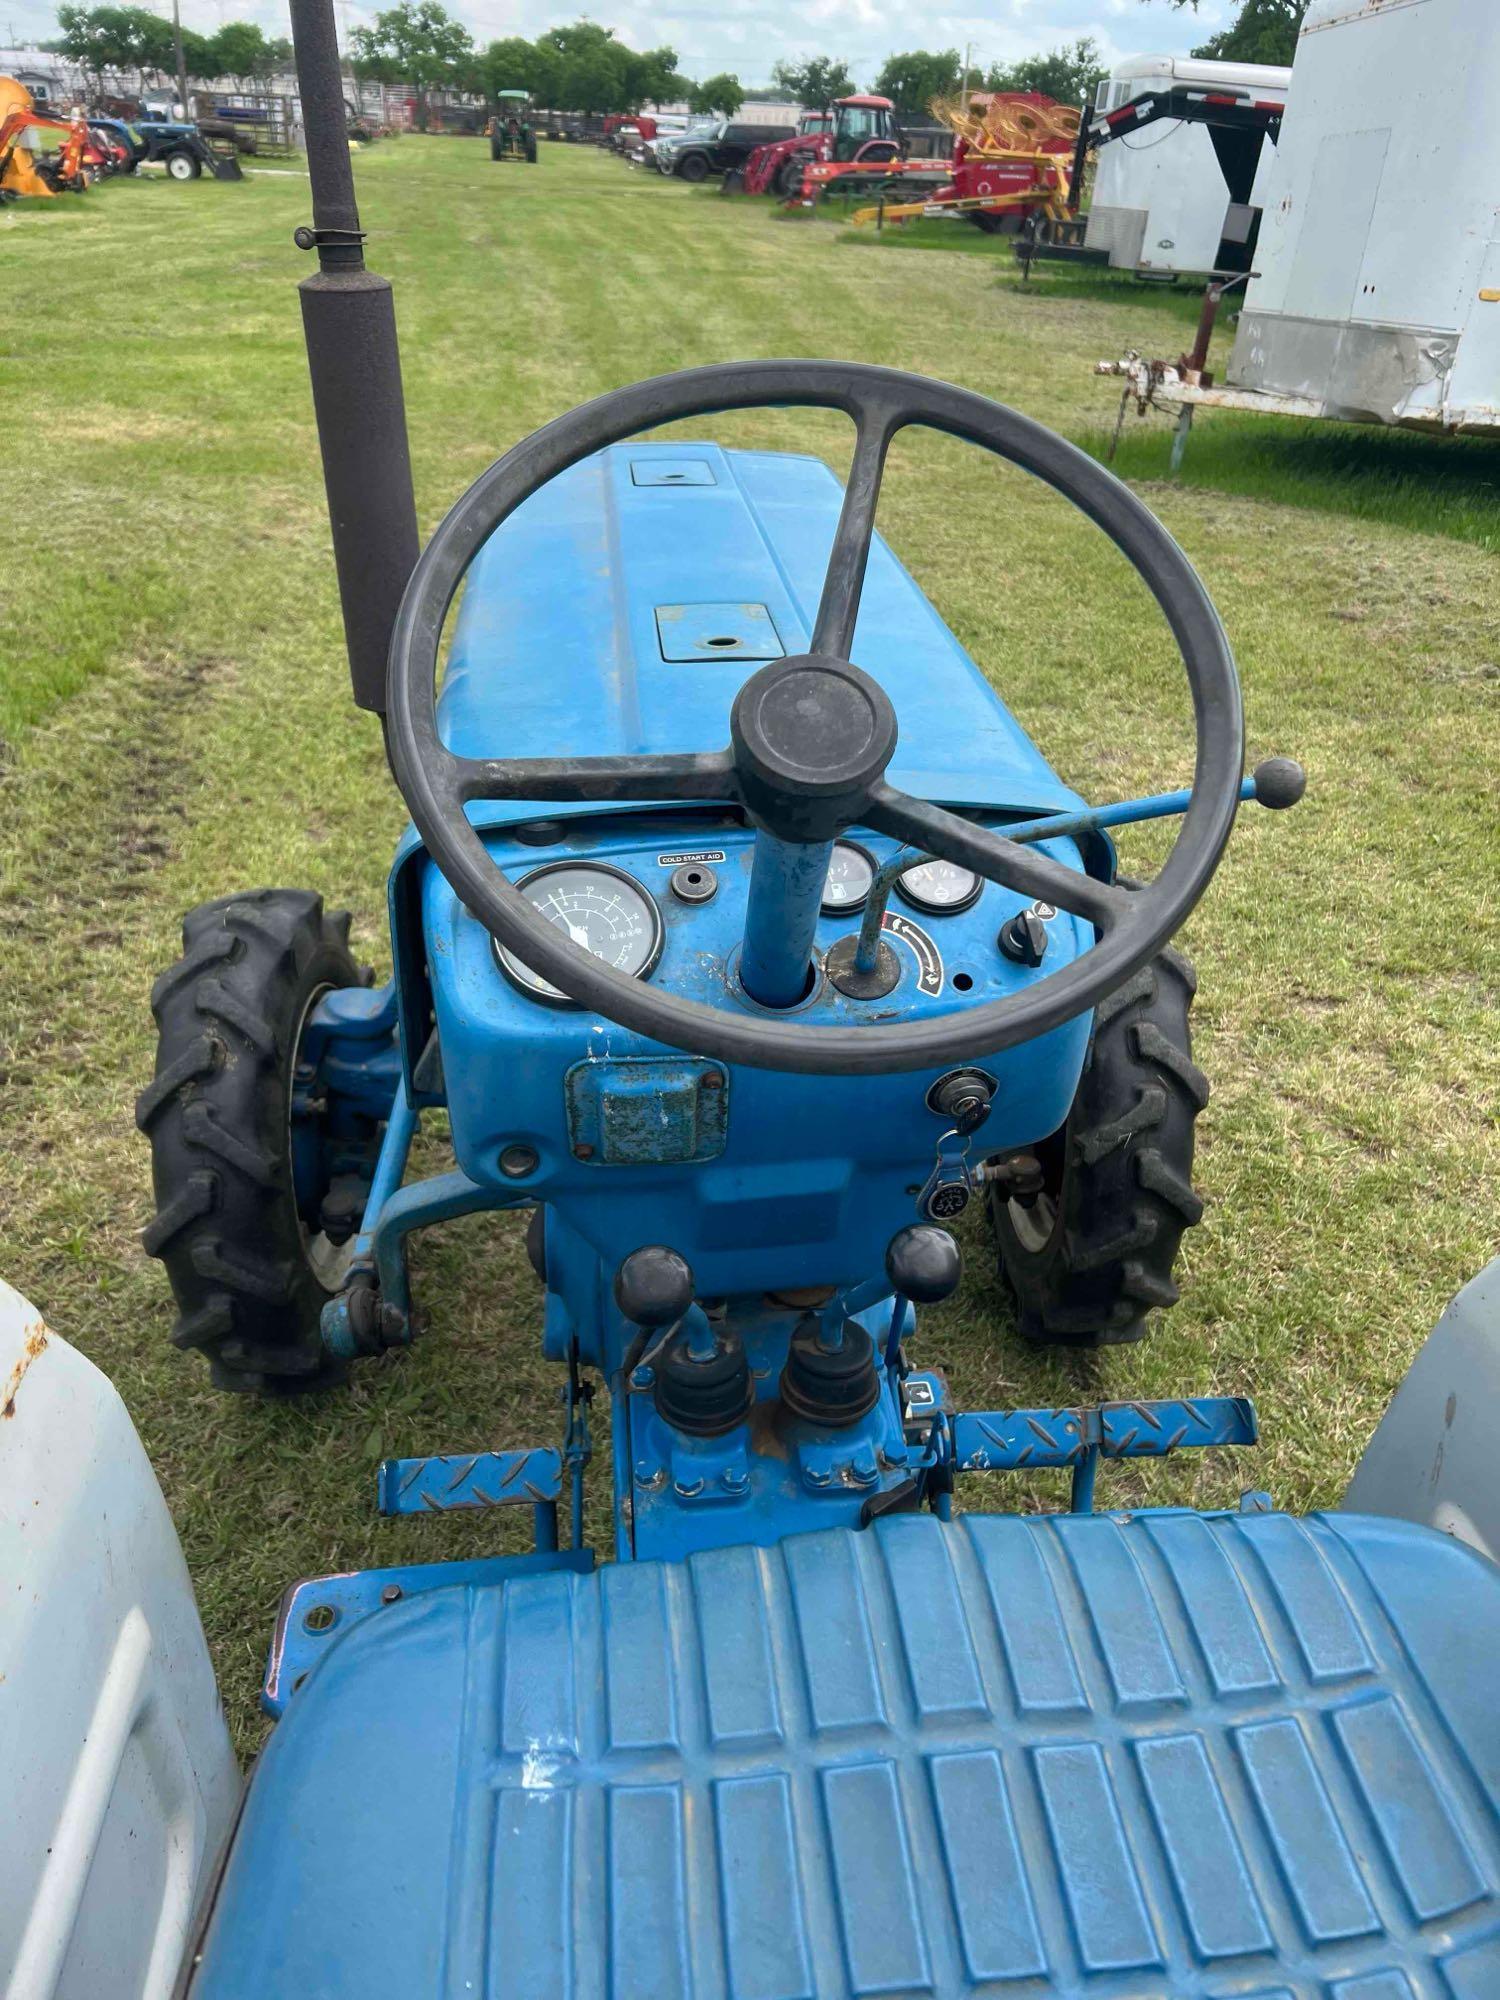 Ford 1910 4wd Tractor with 5 foot Brush Hog - 147 hours - Super Clean and Nice